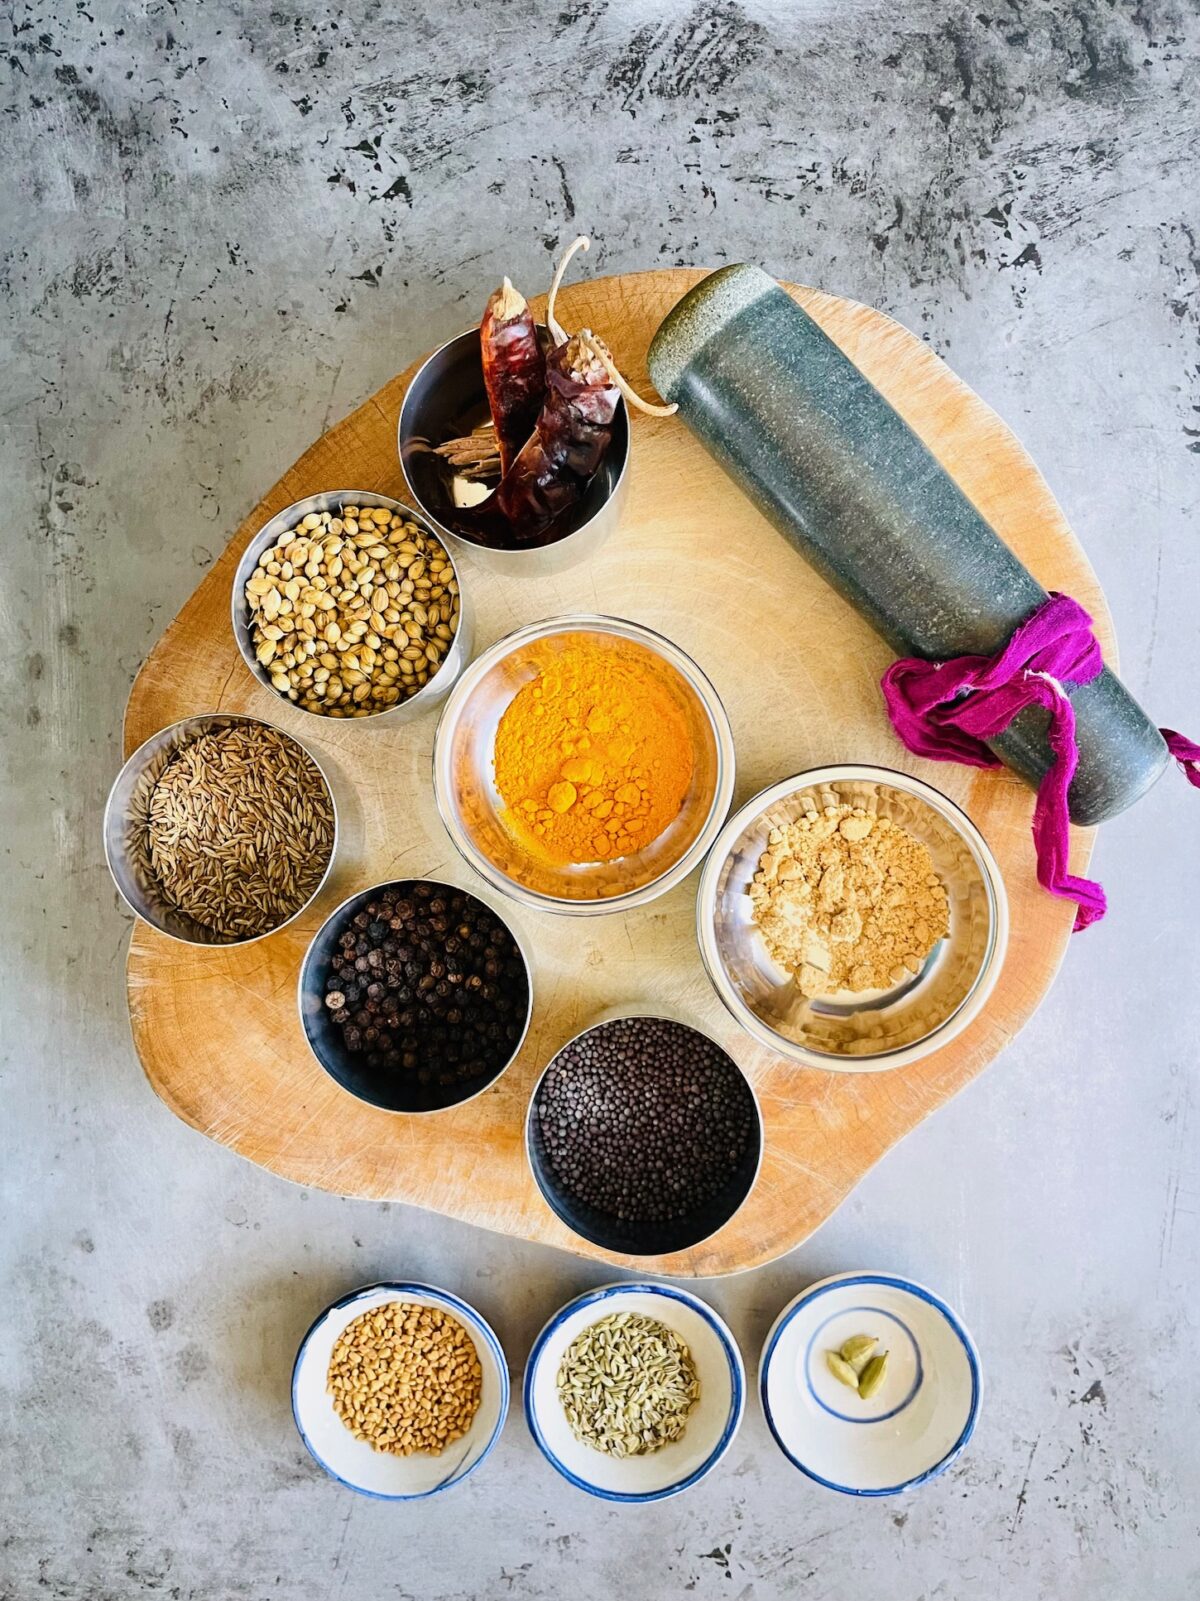 Whole spices for Indian curry powder in bowls: whole red chilies, coriander seeds, cumin seeds, black peppercorn, turmeric powder, ginger powder, mustard seeds, fenugreek seeds, fennel seeds and cardamom pods.